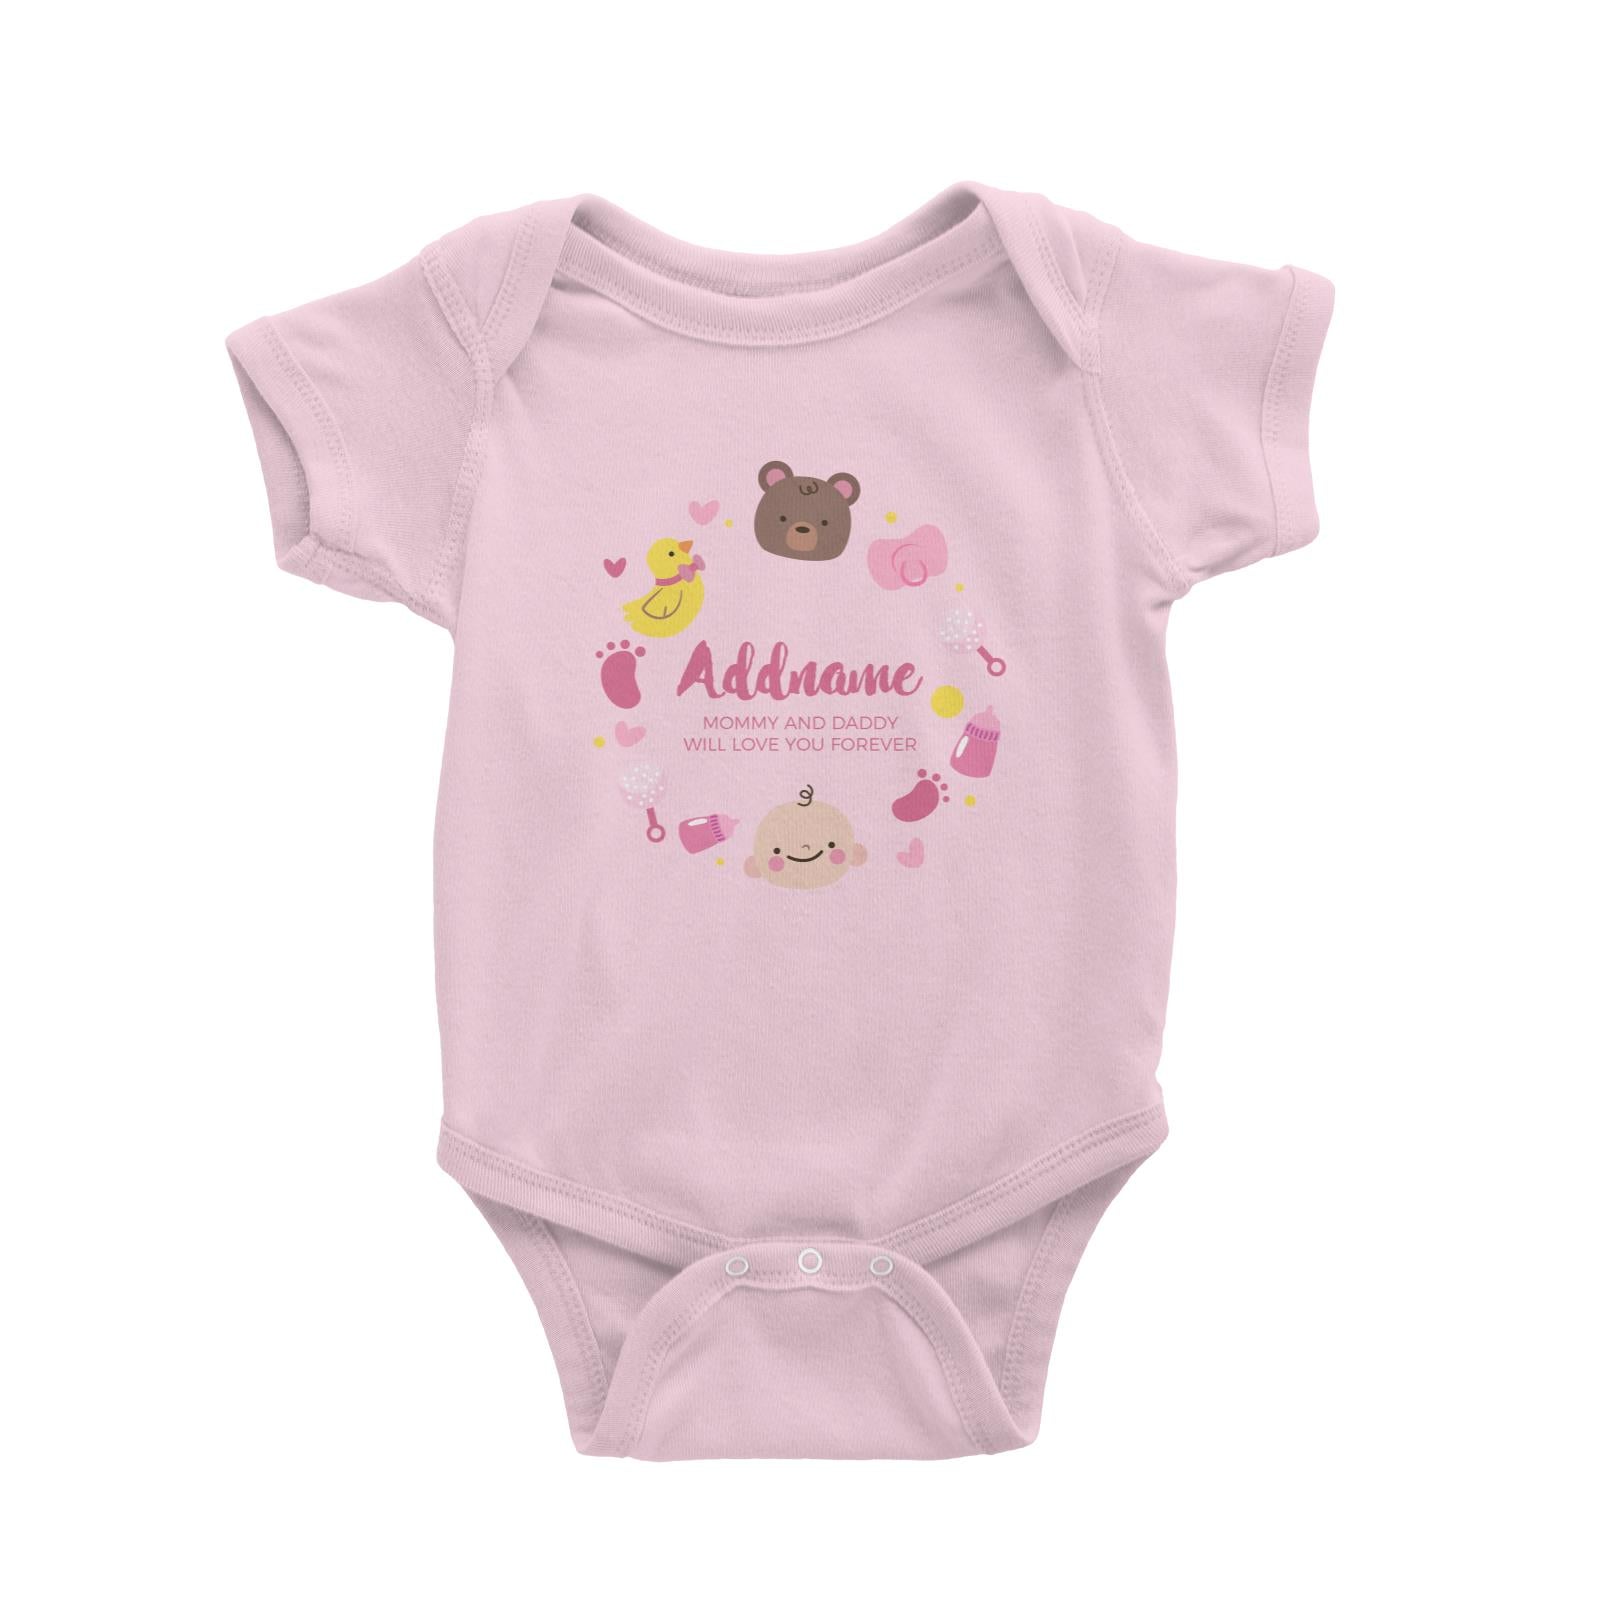 Cute Baby Girl Elements Personalizable with Name and Text Baby Romper